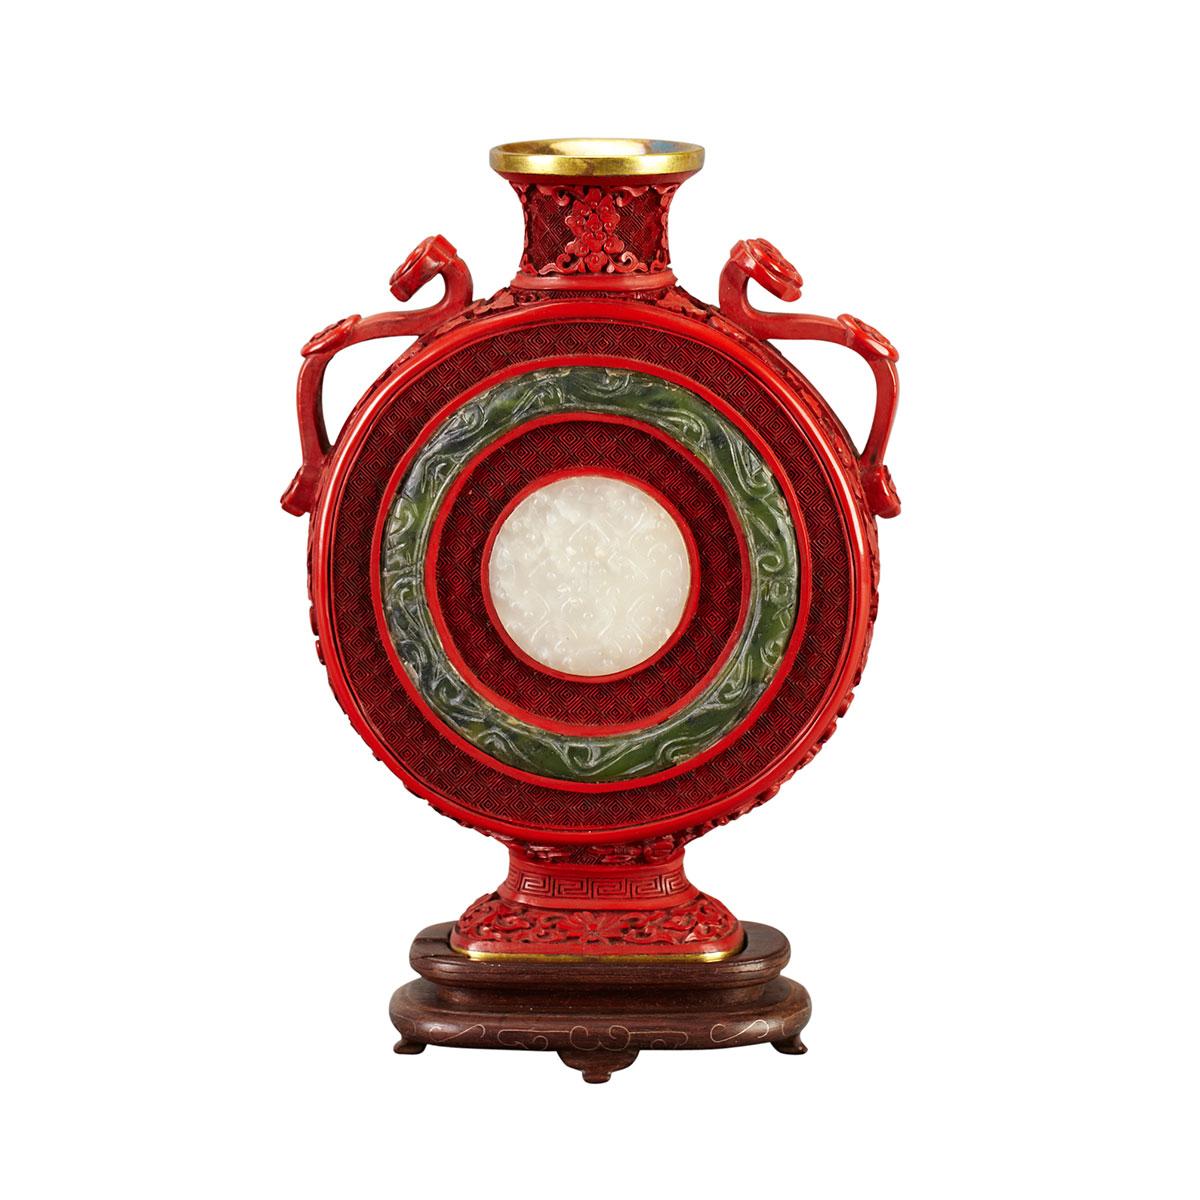 Cinnabar Lacquer Moonflask with Jade Inlays, Republican Period